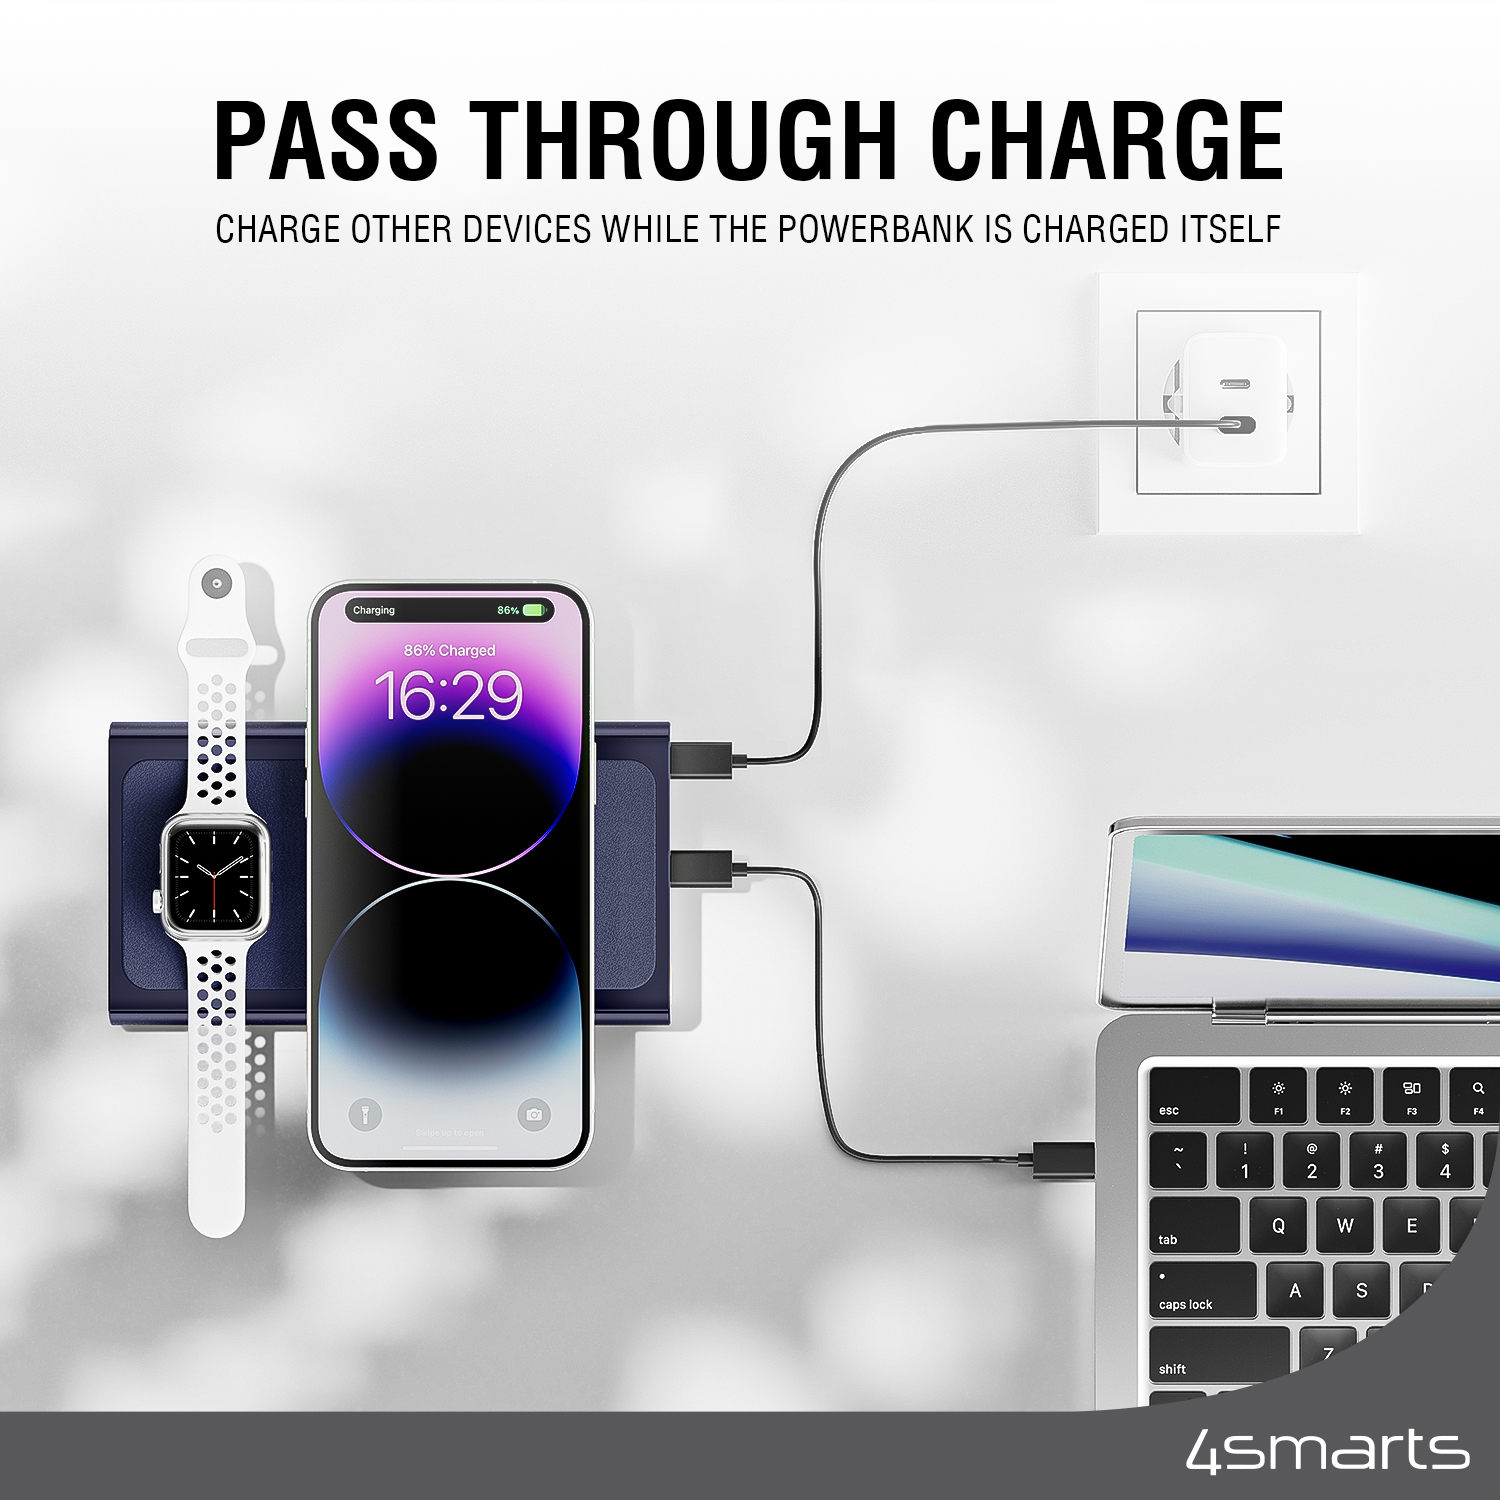 With 4smarts Grahene UltiMag Pro 24,000mAH powerbank, you don't have to decide which device to charge.